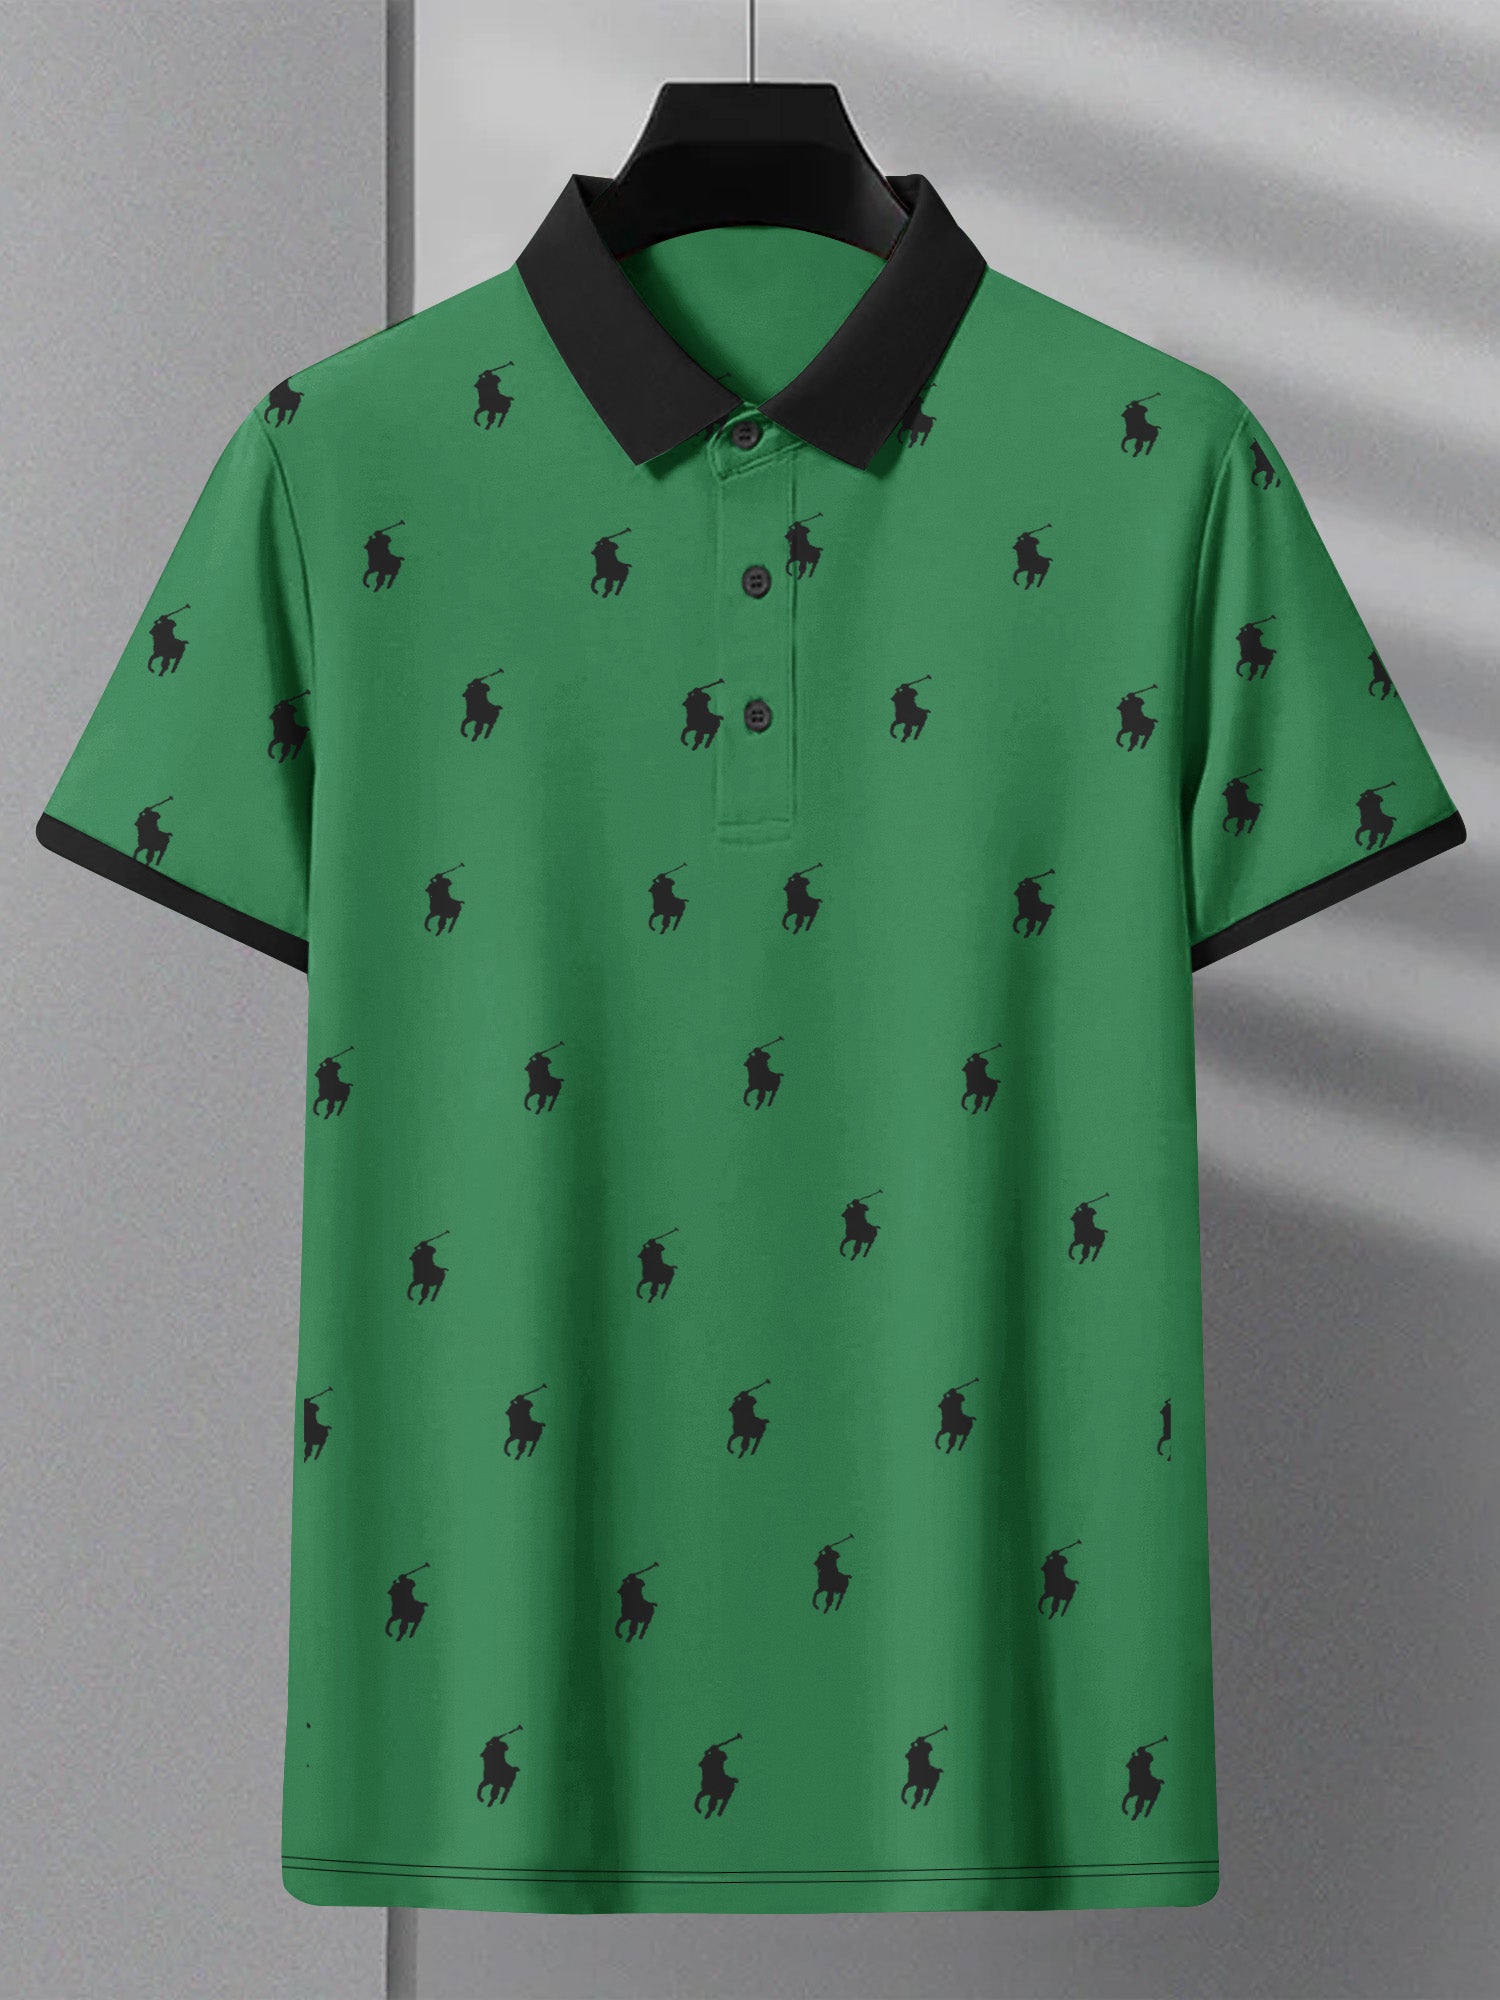 PRL Summer Polo Shirt For Men-Green with Allover Print-BE679/BR12932